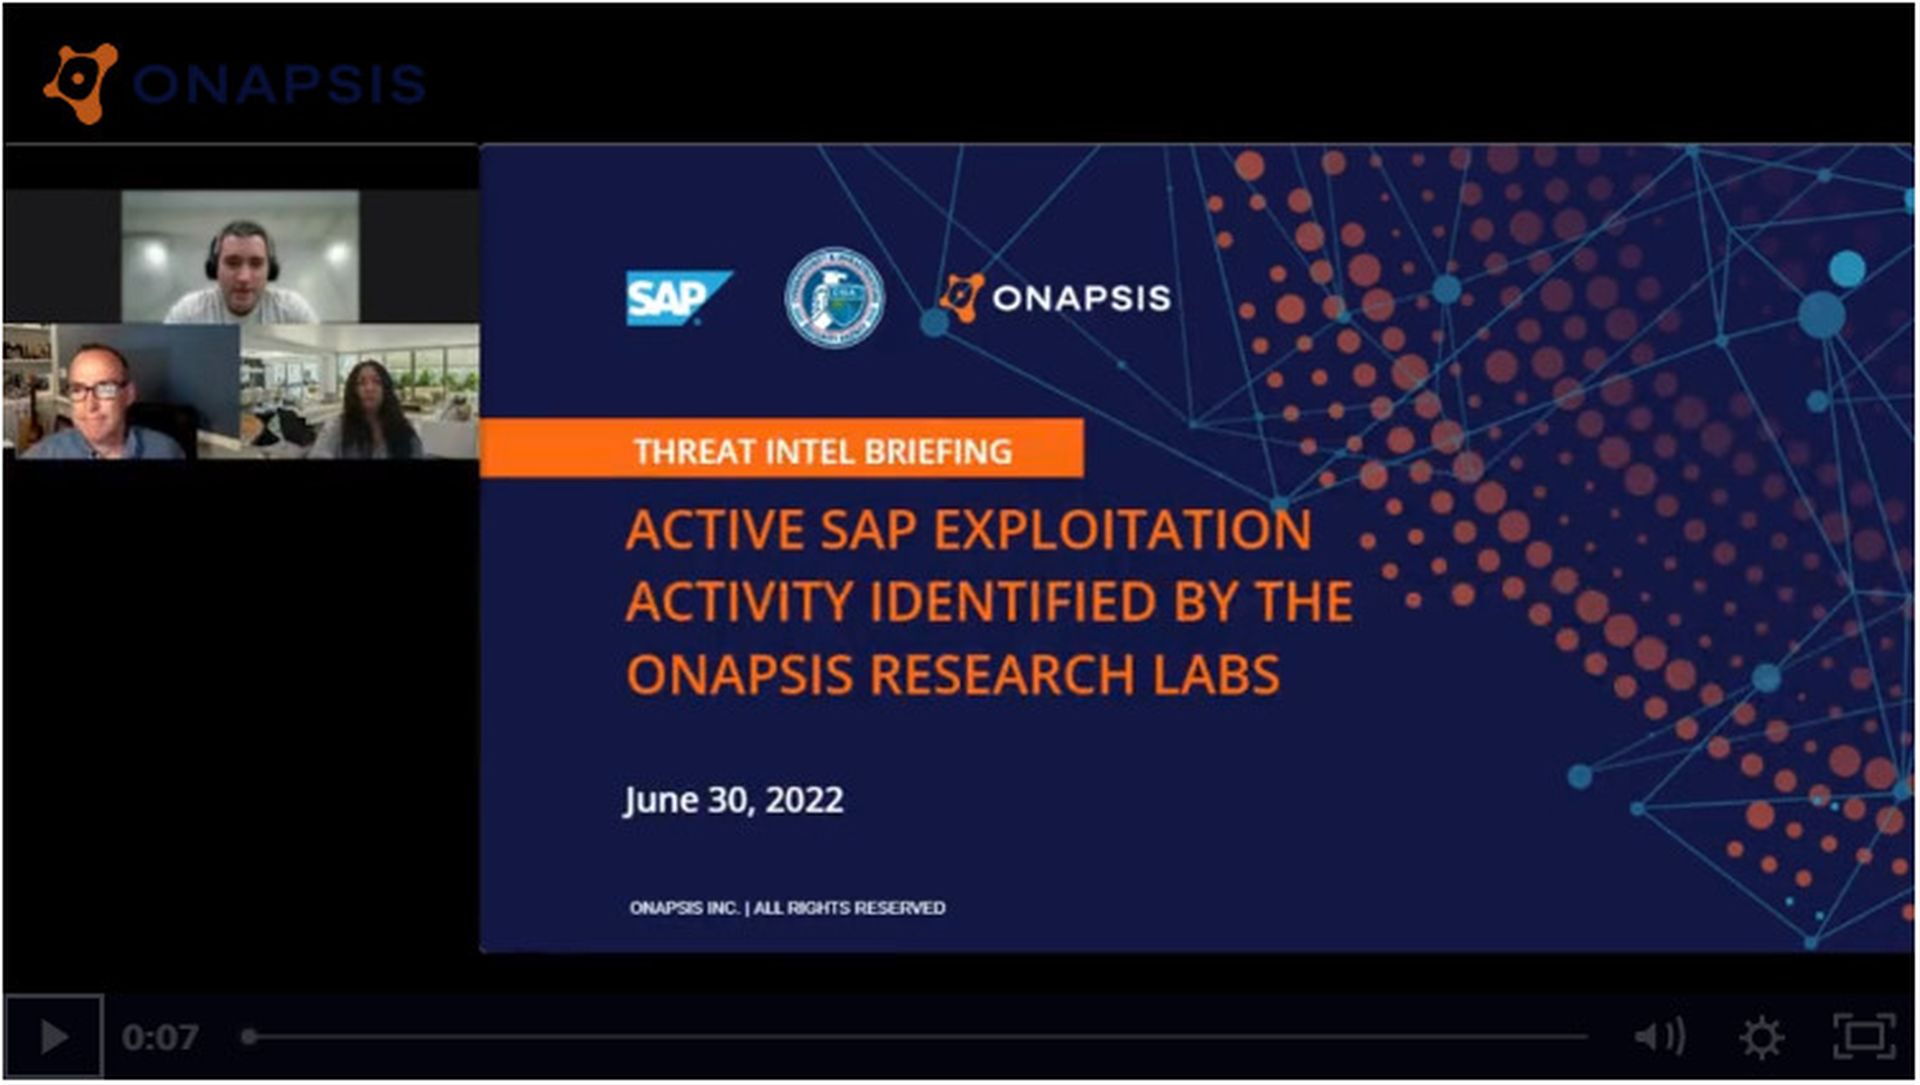 Active SAP Exploitation Activity Identified by the Onapsis Research Labs